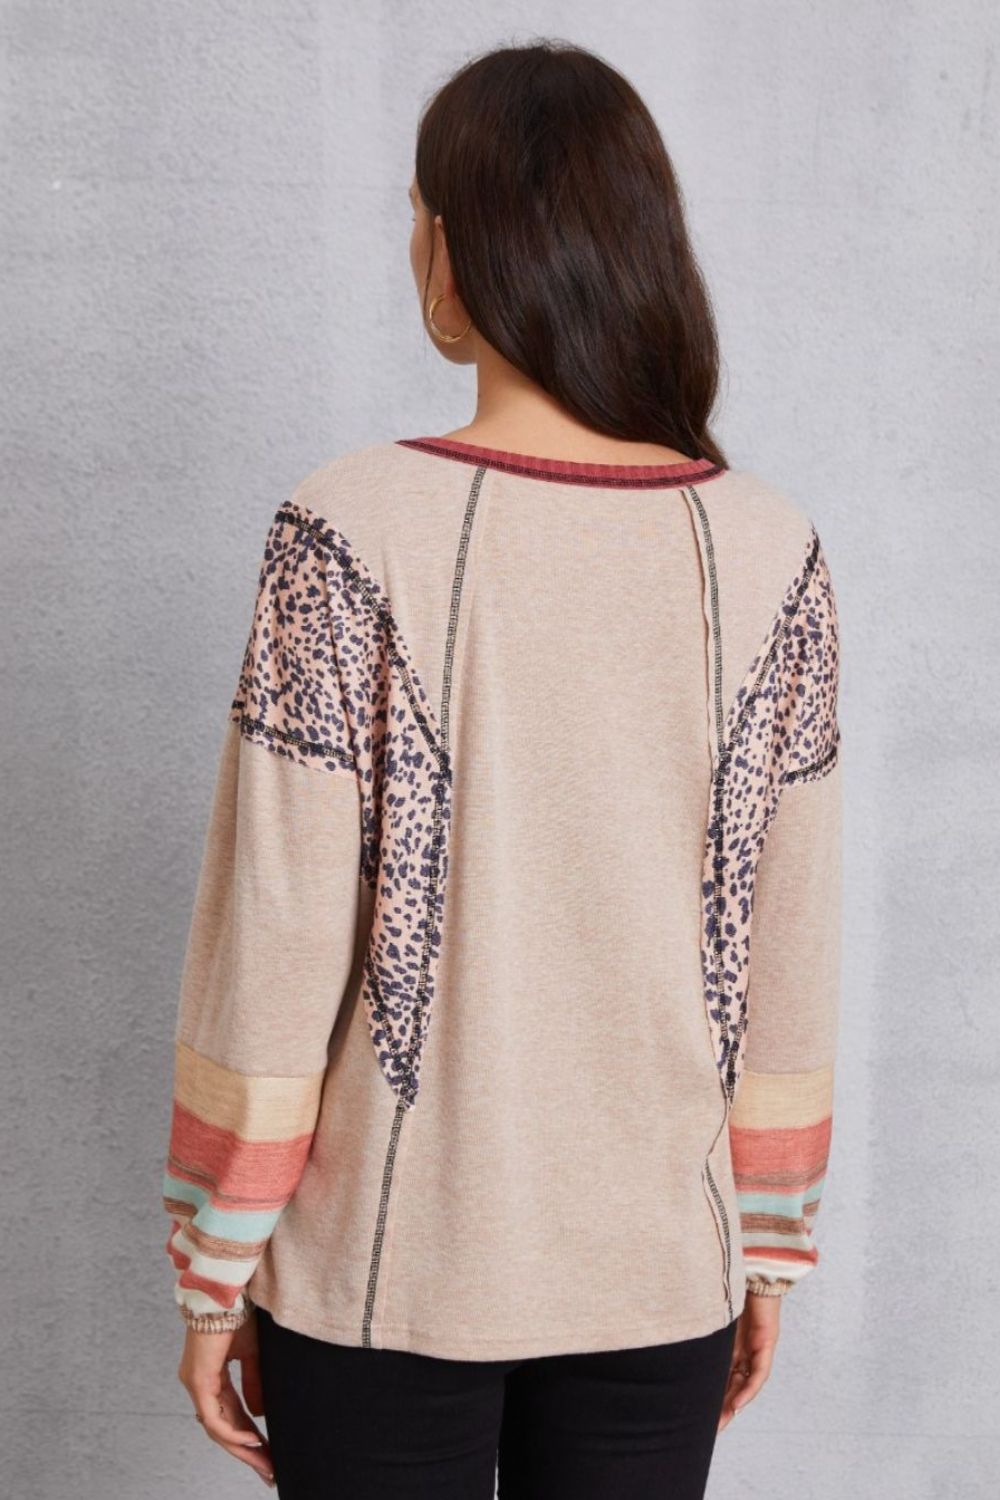 Contrast Stitching Leopard Long Sleeve Blouse - Women’s Clothing & Accessories - Shirts & Tops - 2 - 2024